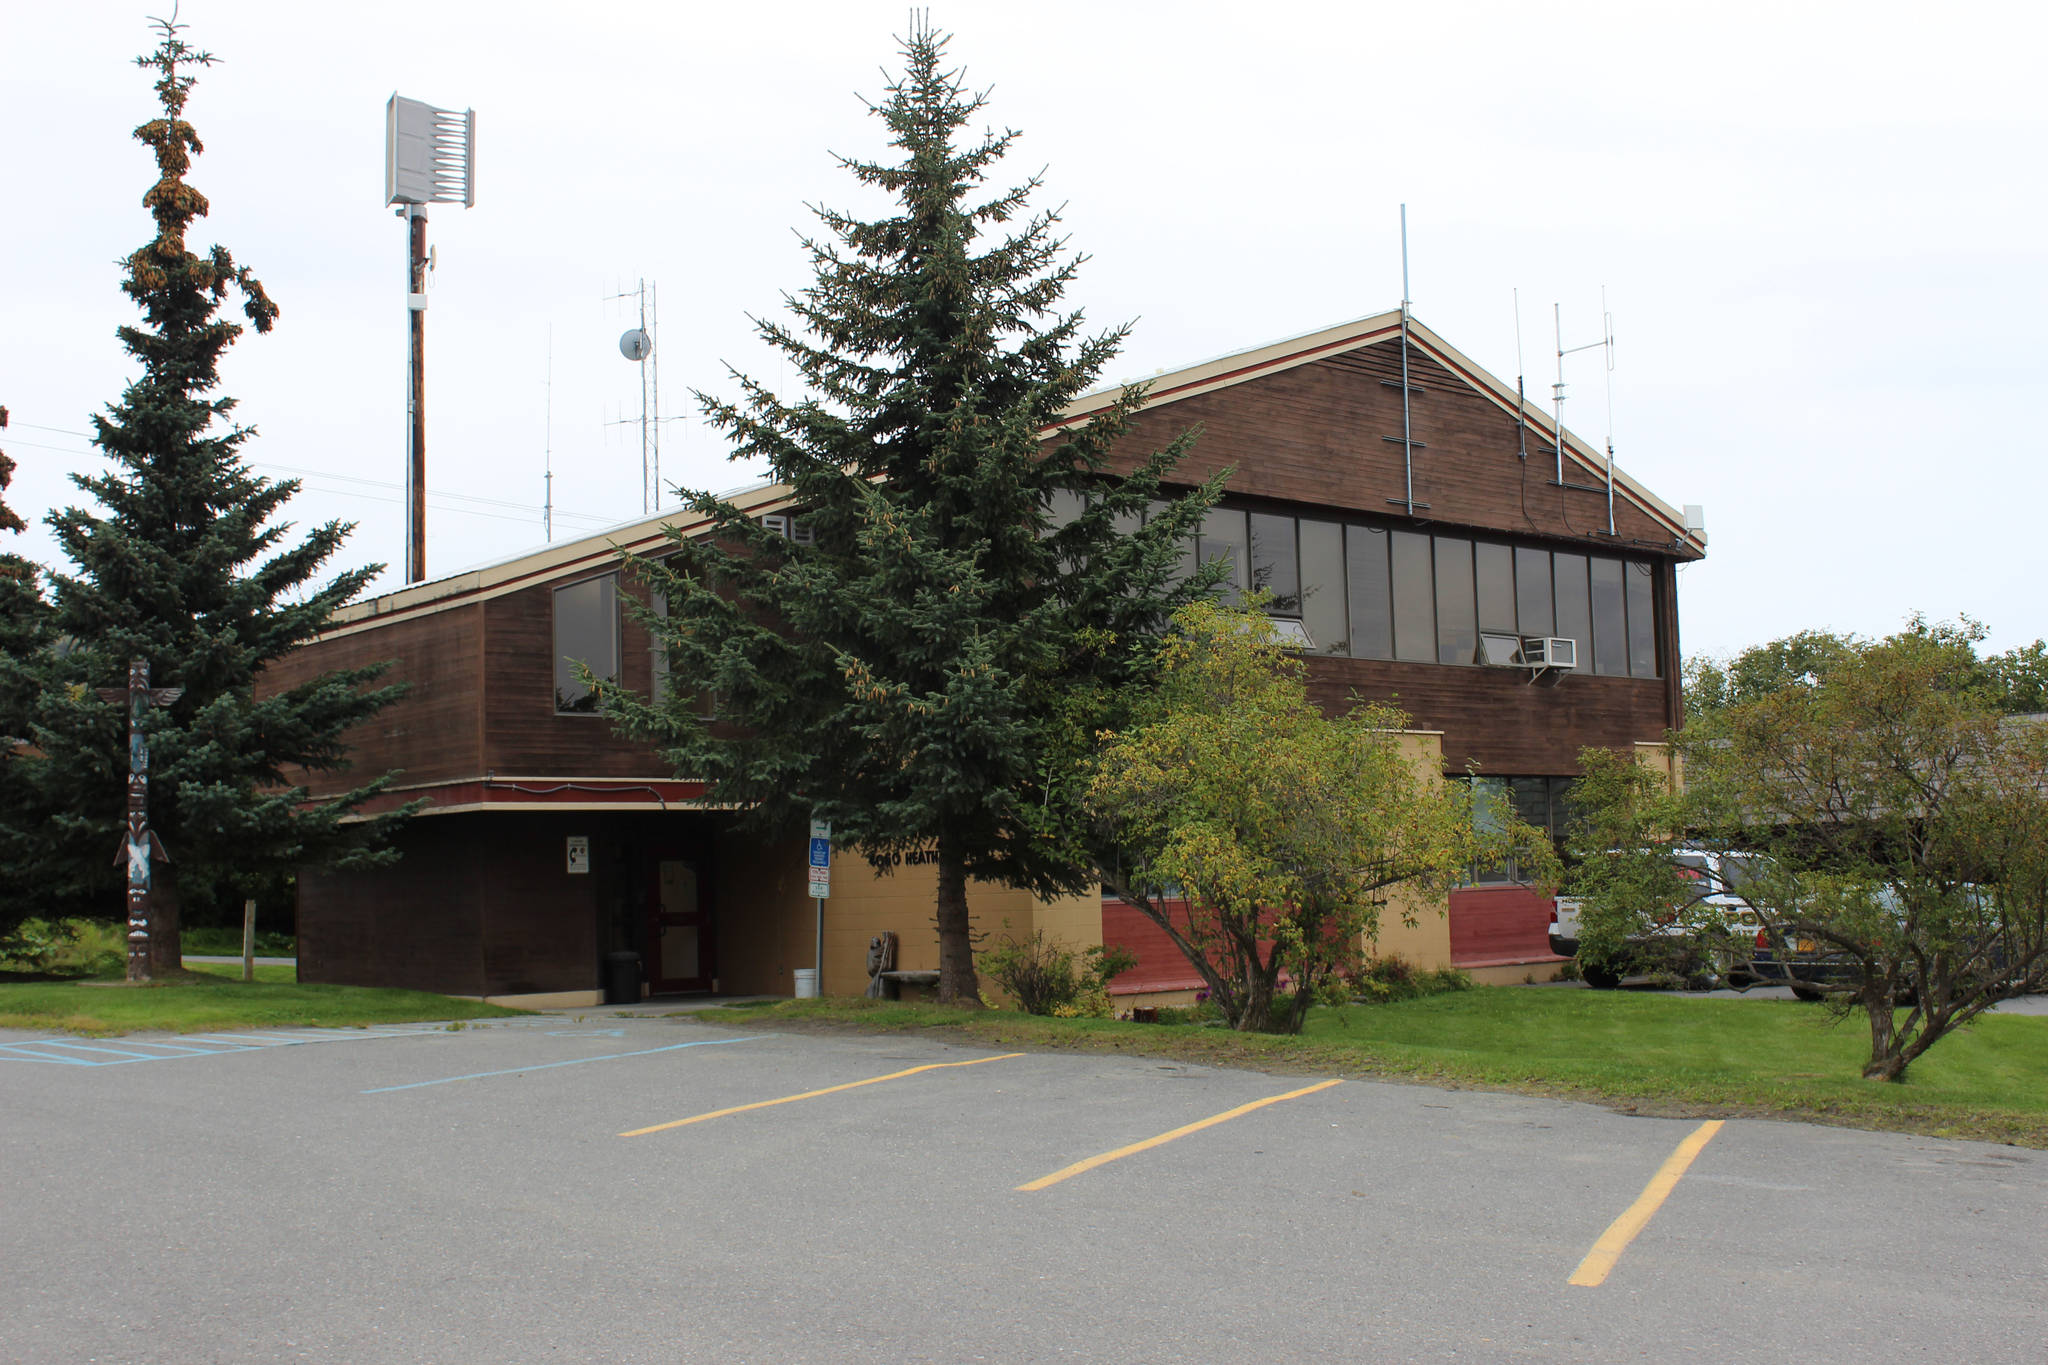 The 39-year-old current Homer Police Station at its location on upper Heath Street near Homer High School and above the Homer Volunteer Fire Department. (Homer News file photo)